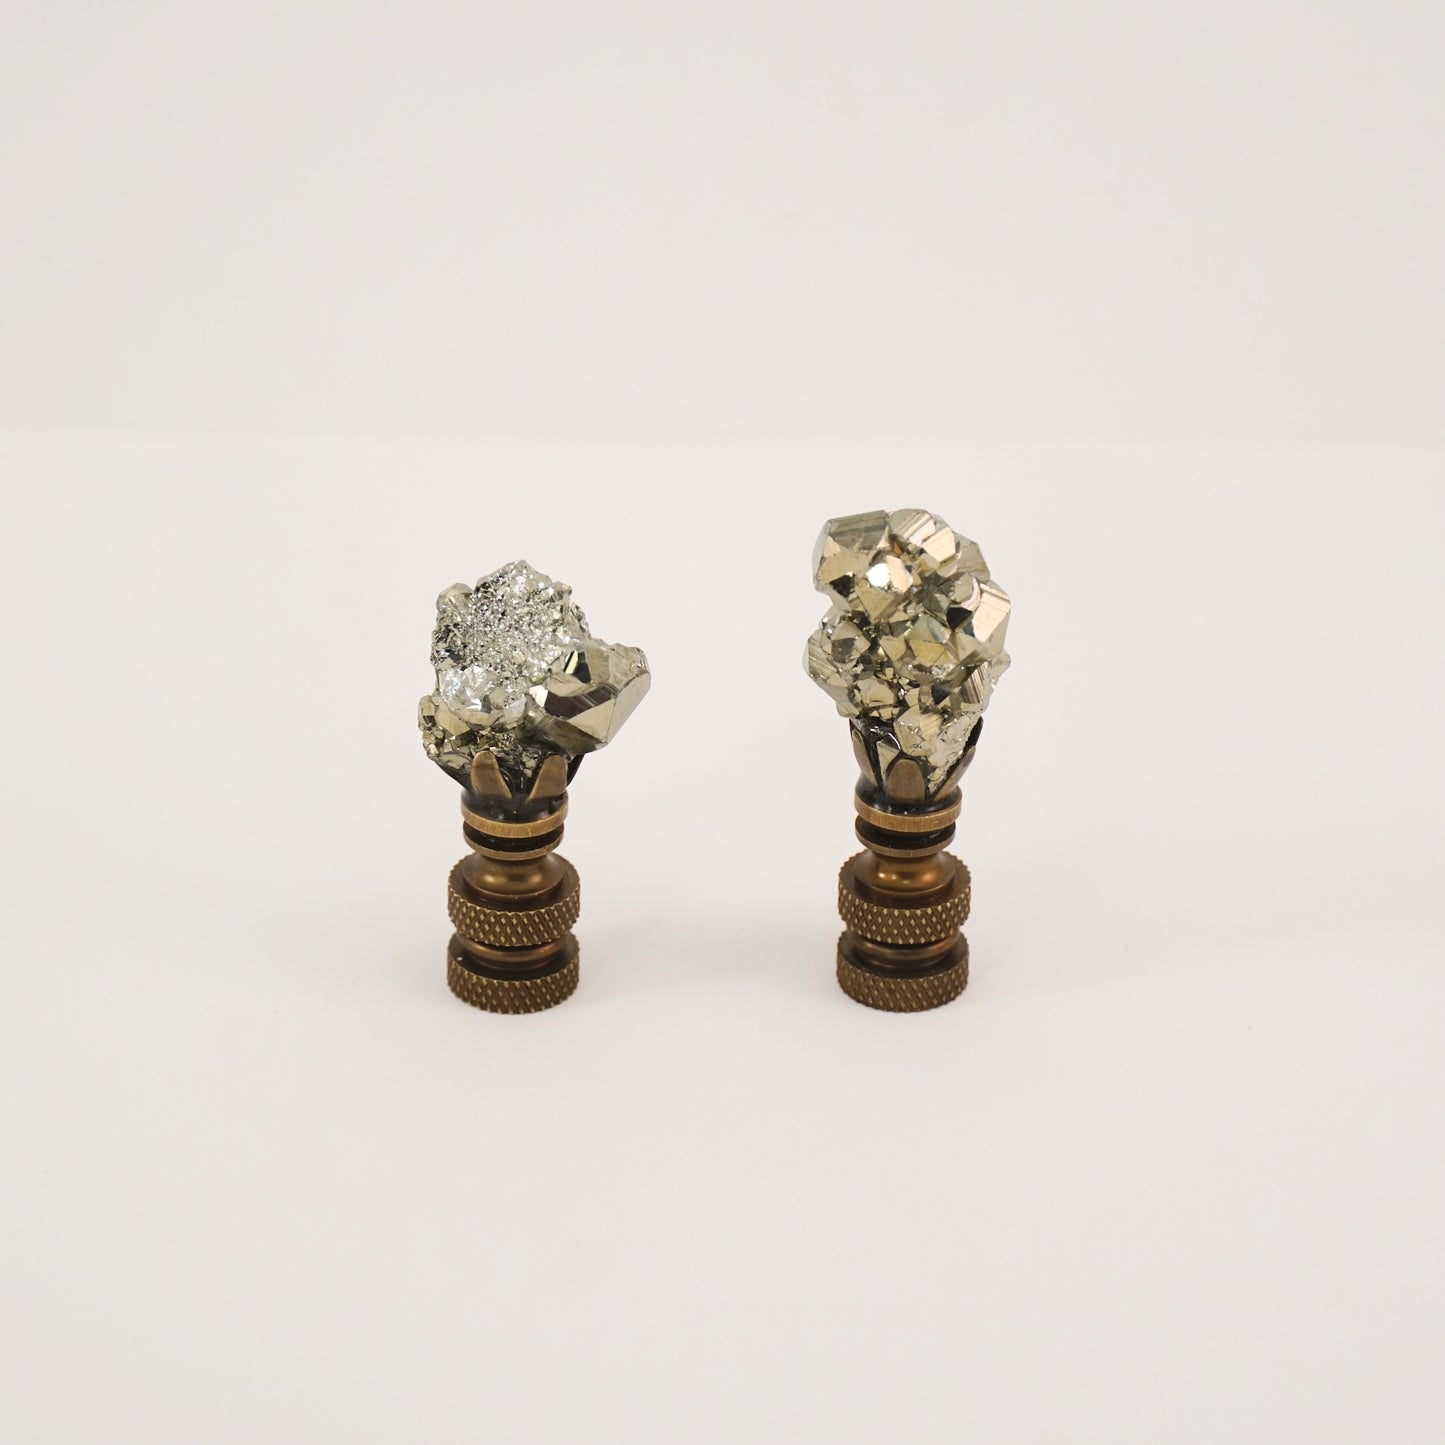 Pyrite Crystal Lamp Finial Pair - Antique Brass